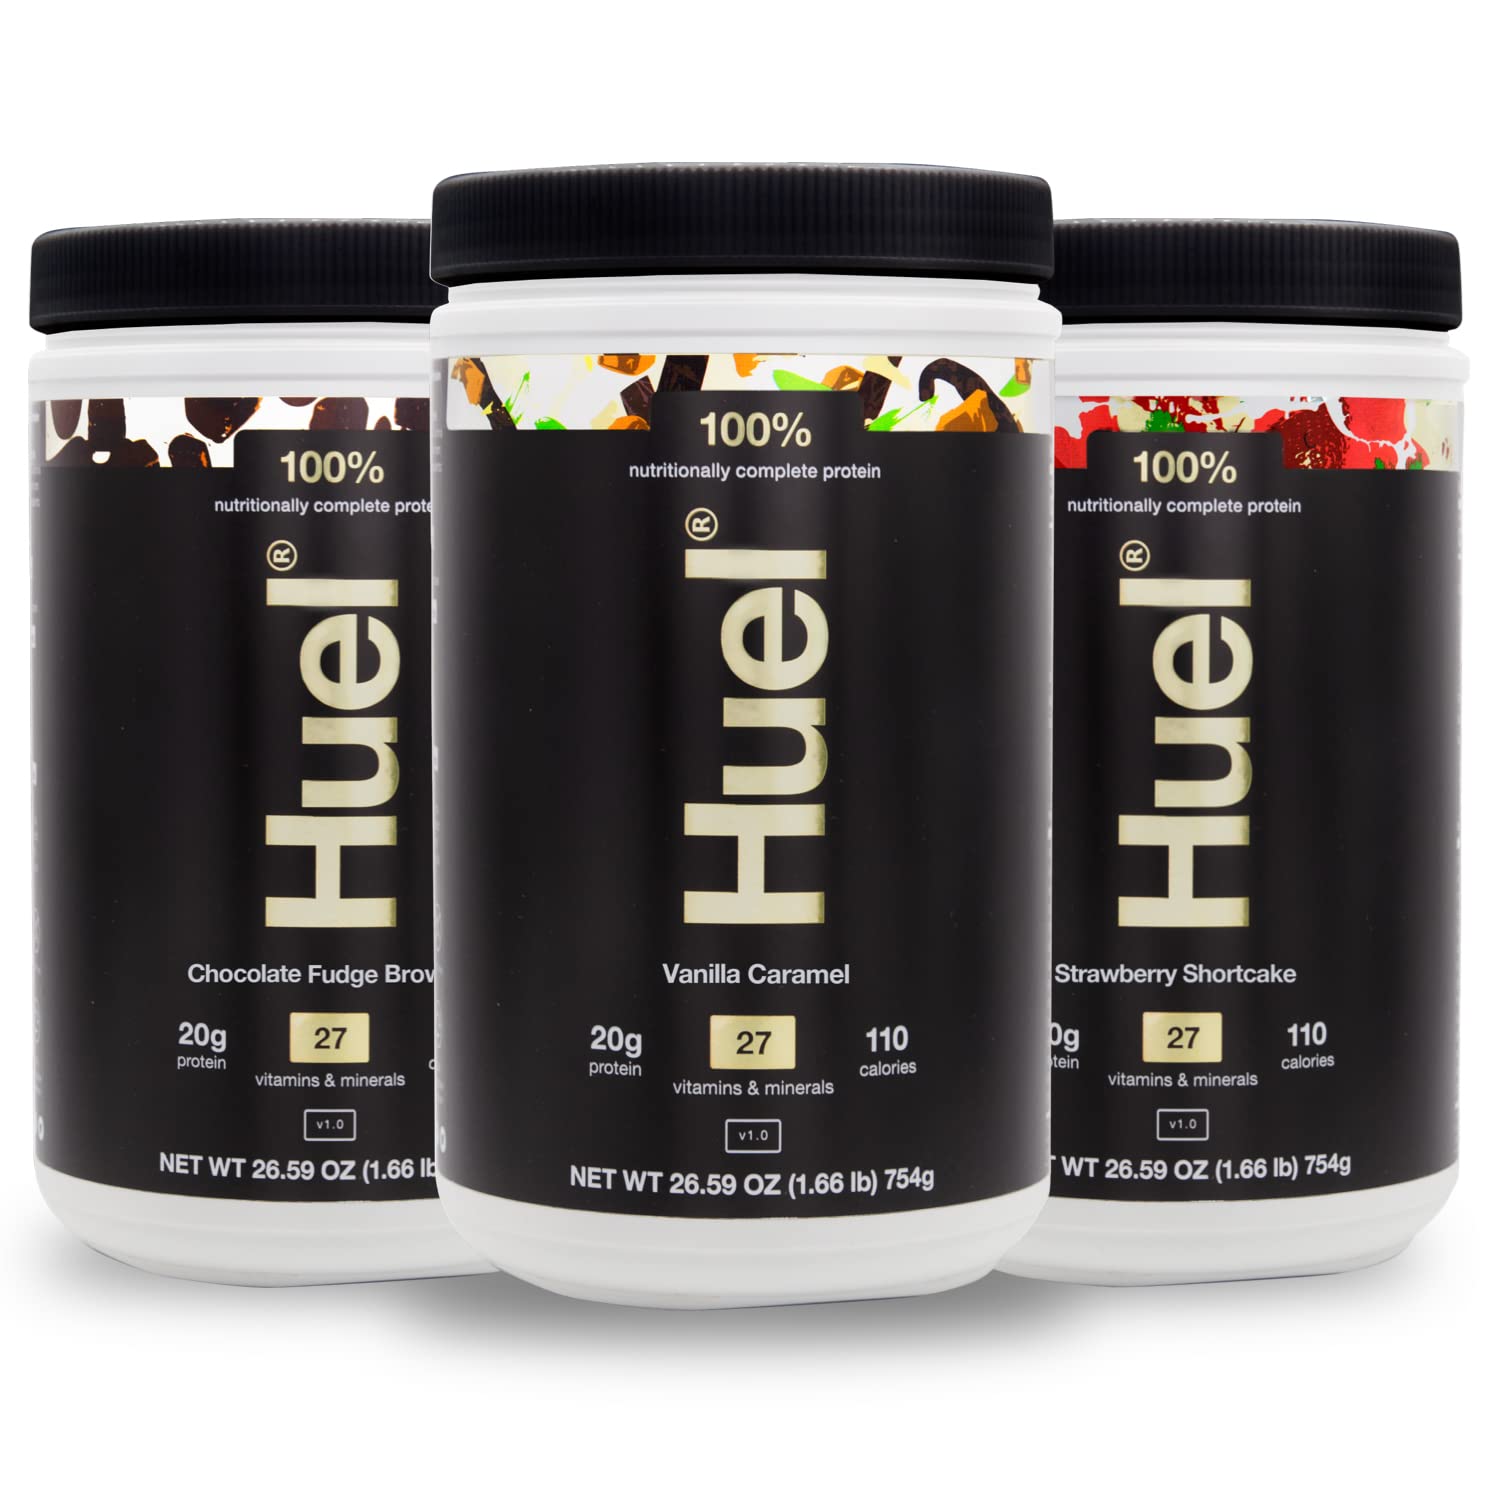 Huel Complete Protein Meal Replacement Starter Kit - 3 Flavor Variety - Chocolate Strawberry Vanilla - 78 Scoops Packed with 100% Nutritionally Complete Food, Including 20g of Protein, 2g of Fiber, and 27 Vitamins and Minerals Packaged in a LastFuel Box